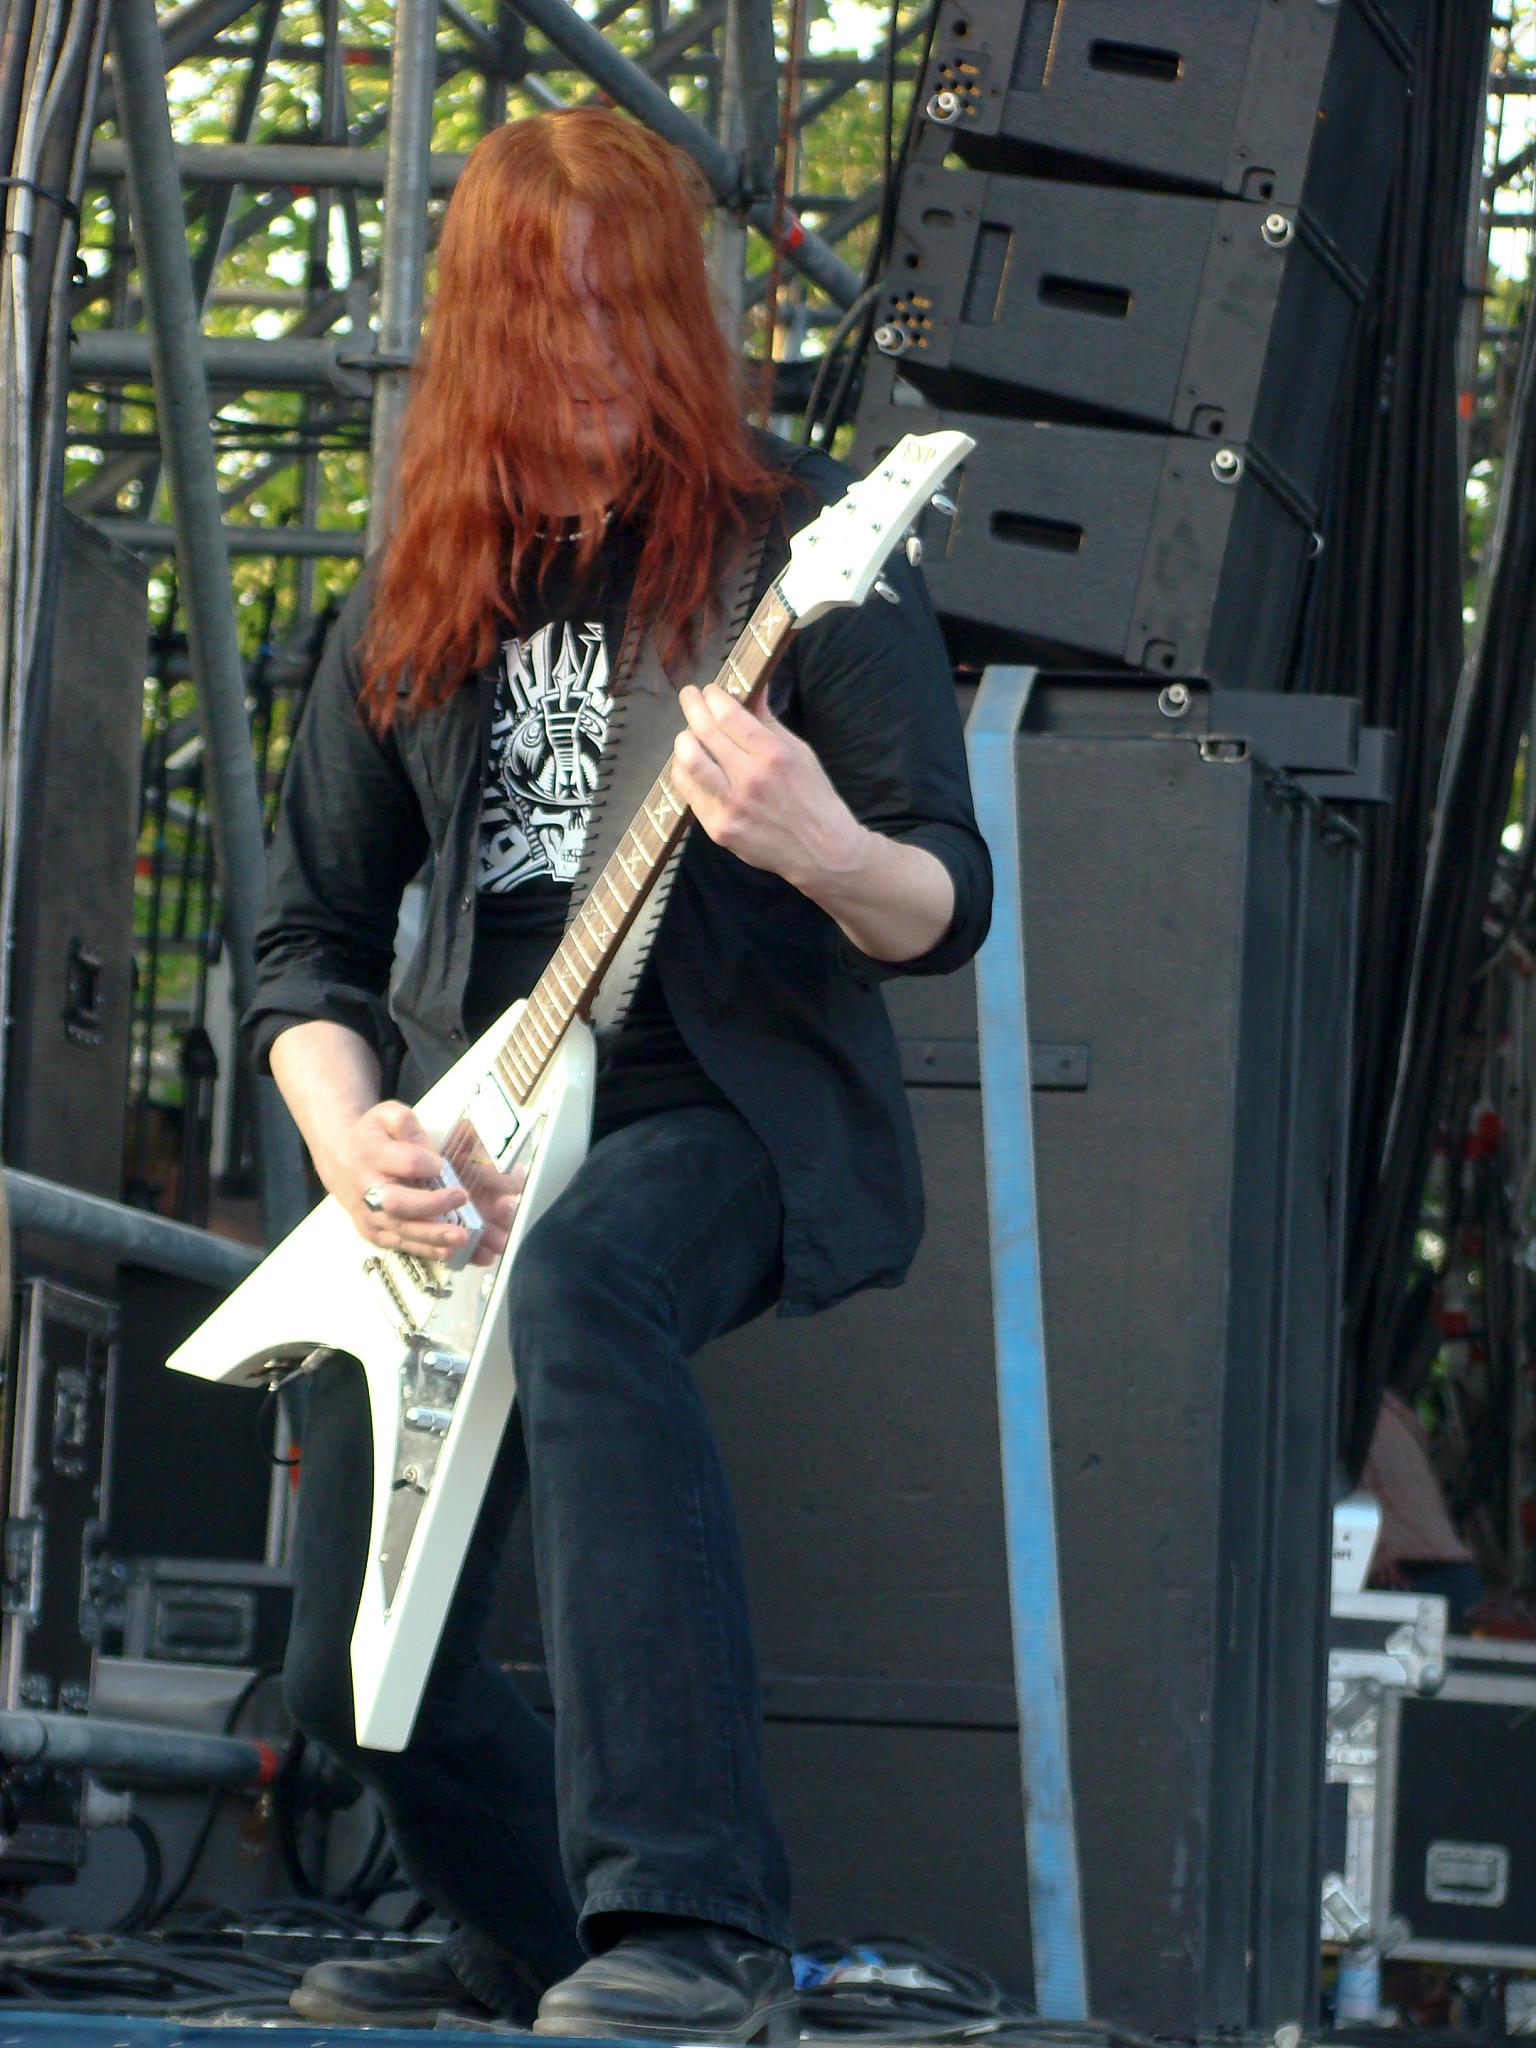 red - headed guitarist with long hair plays guitar on stage